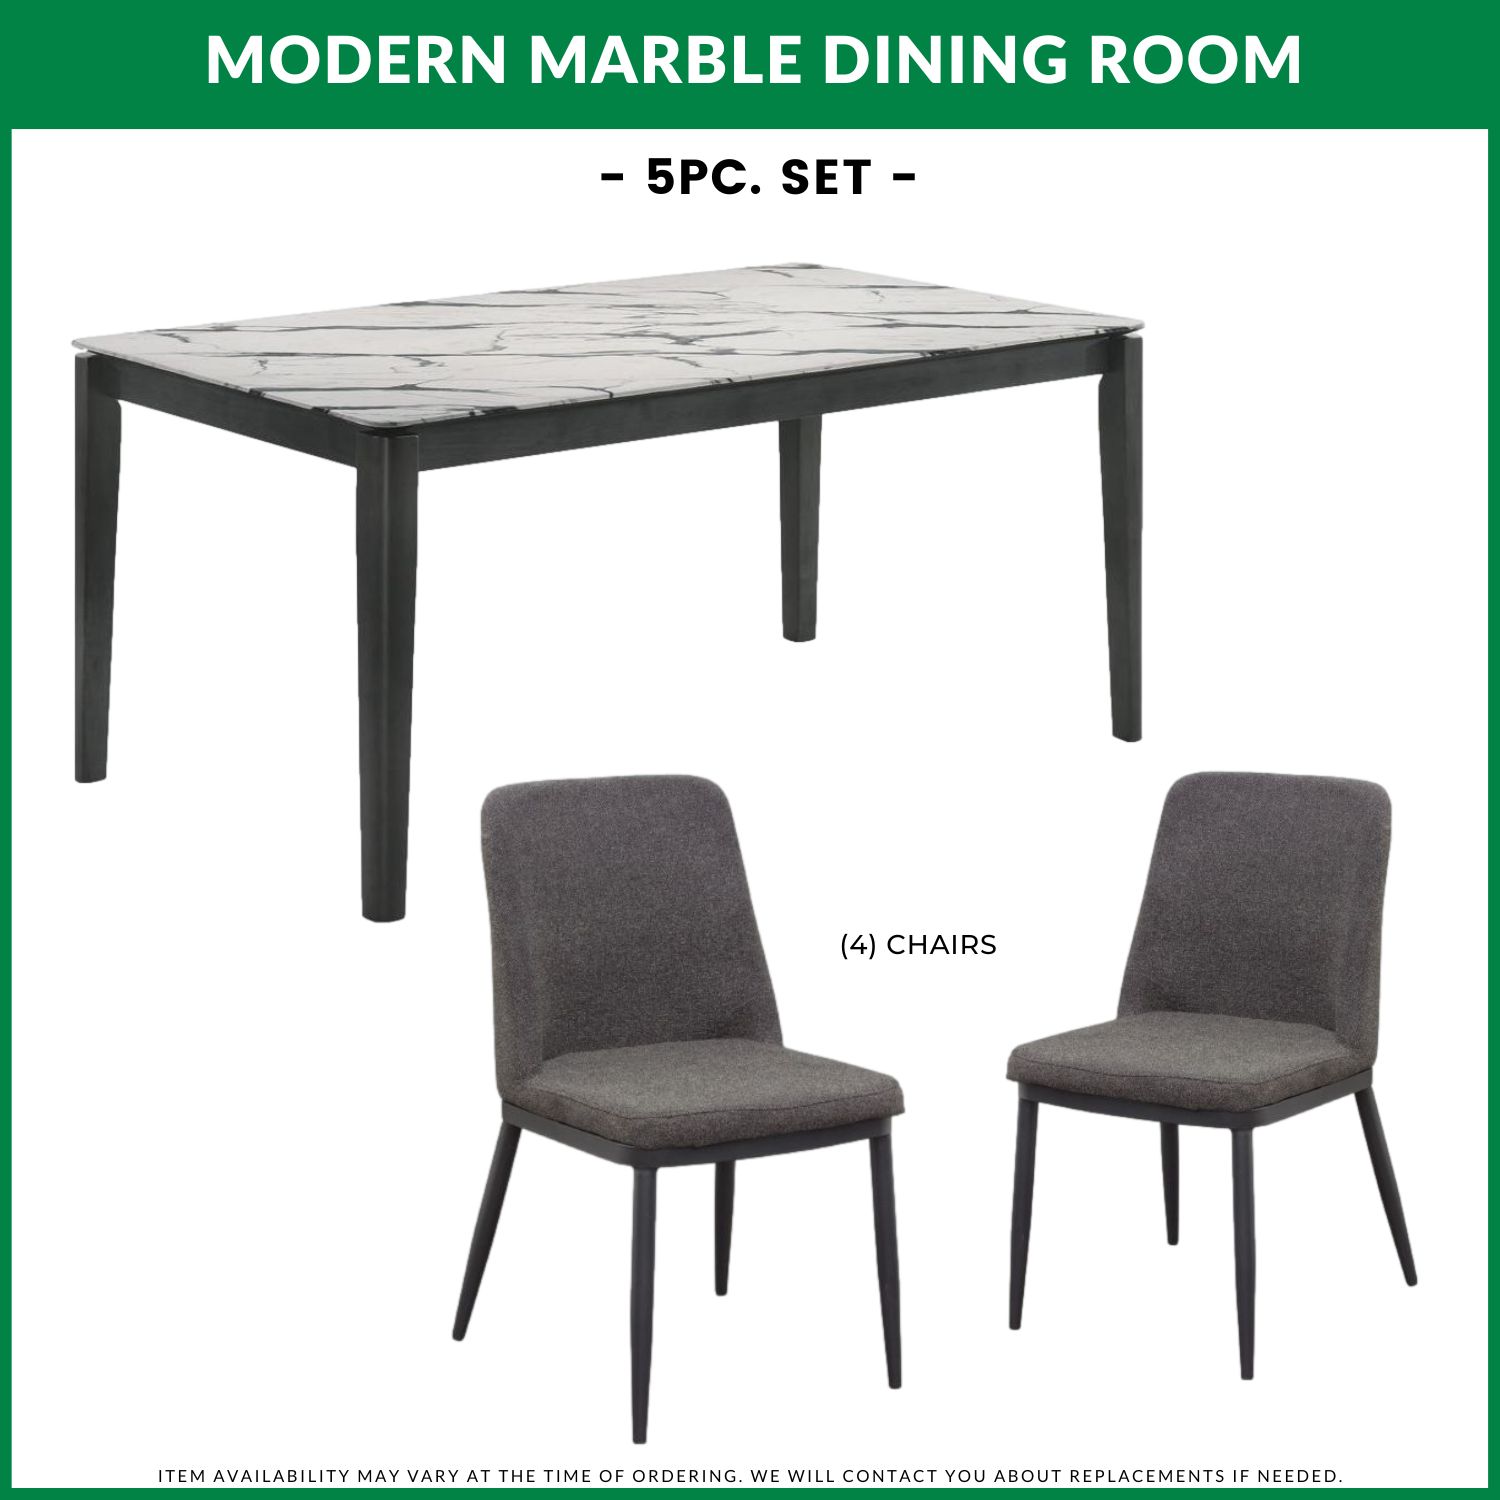 Modern Marble Dining Room - 5 Pc Set